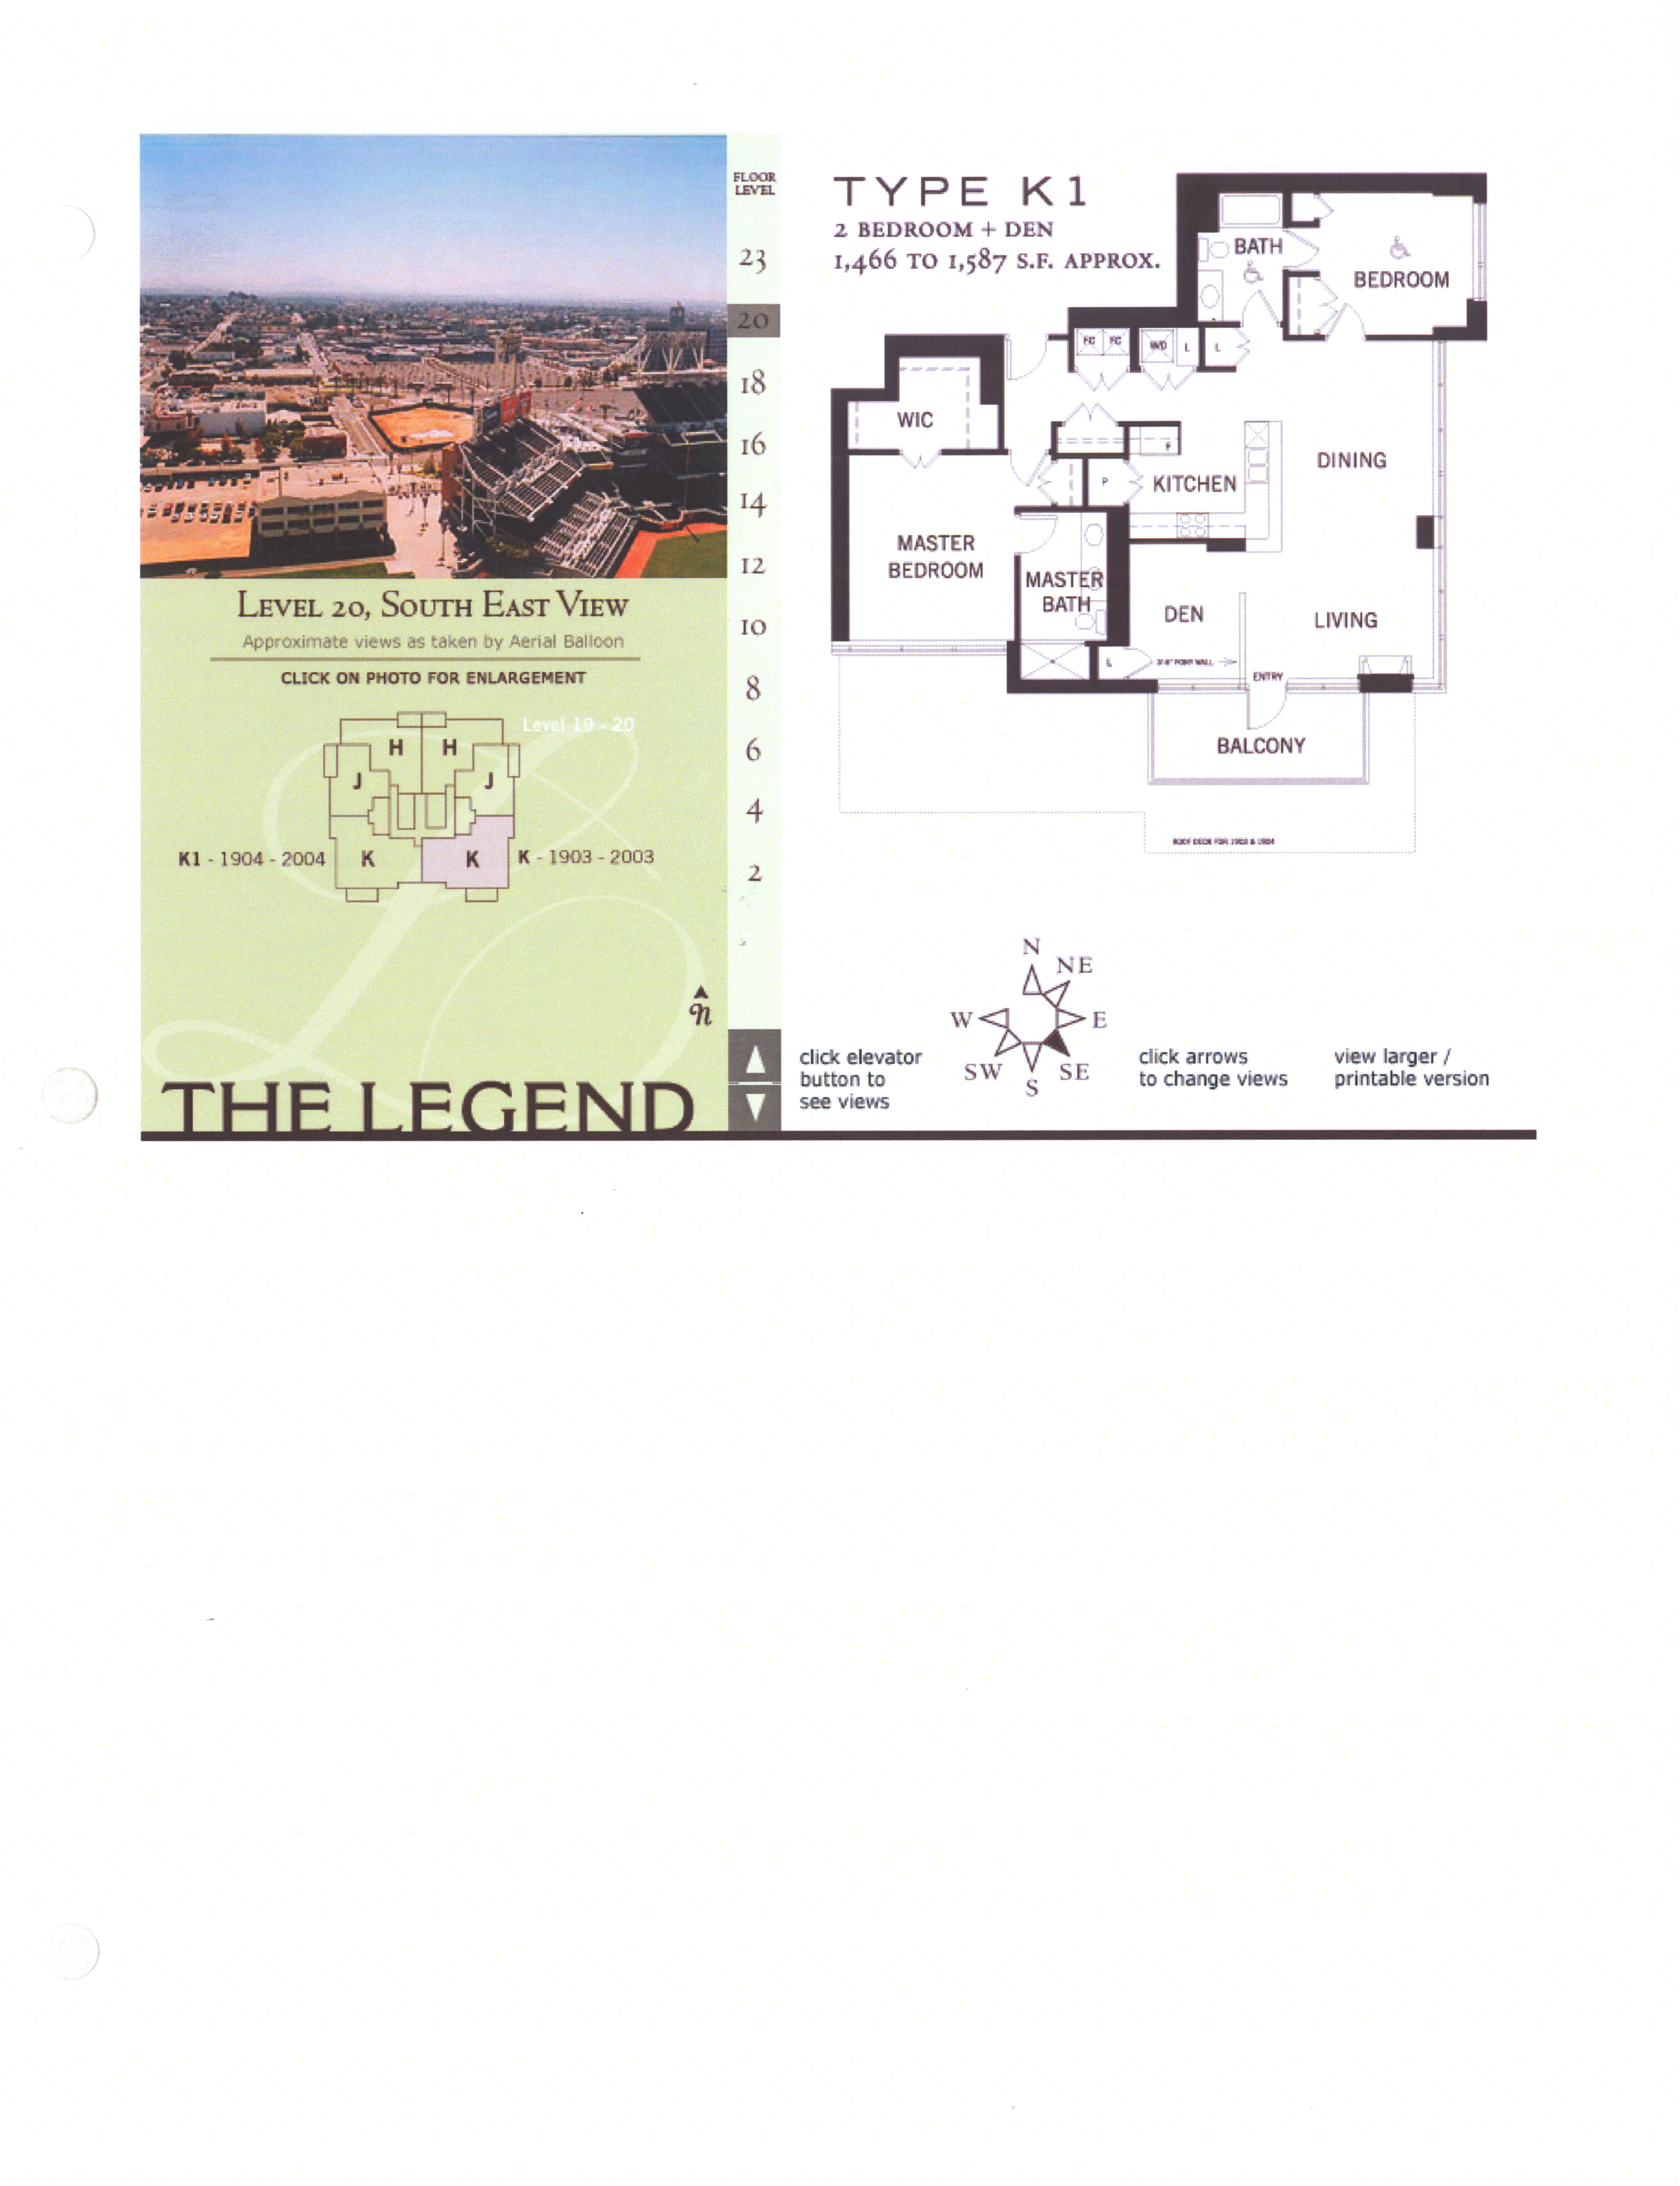 The Legend Floor Plan Level 20, South East View – Type K1